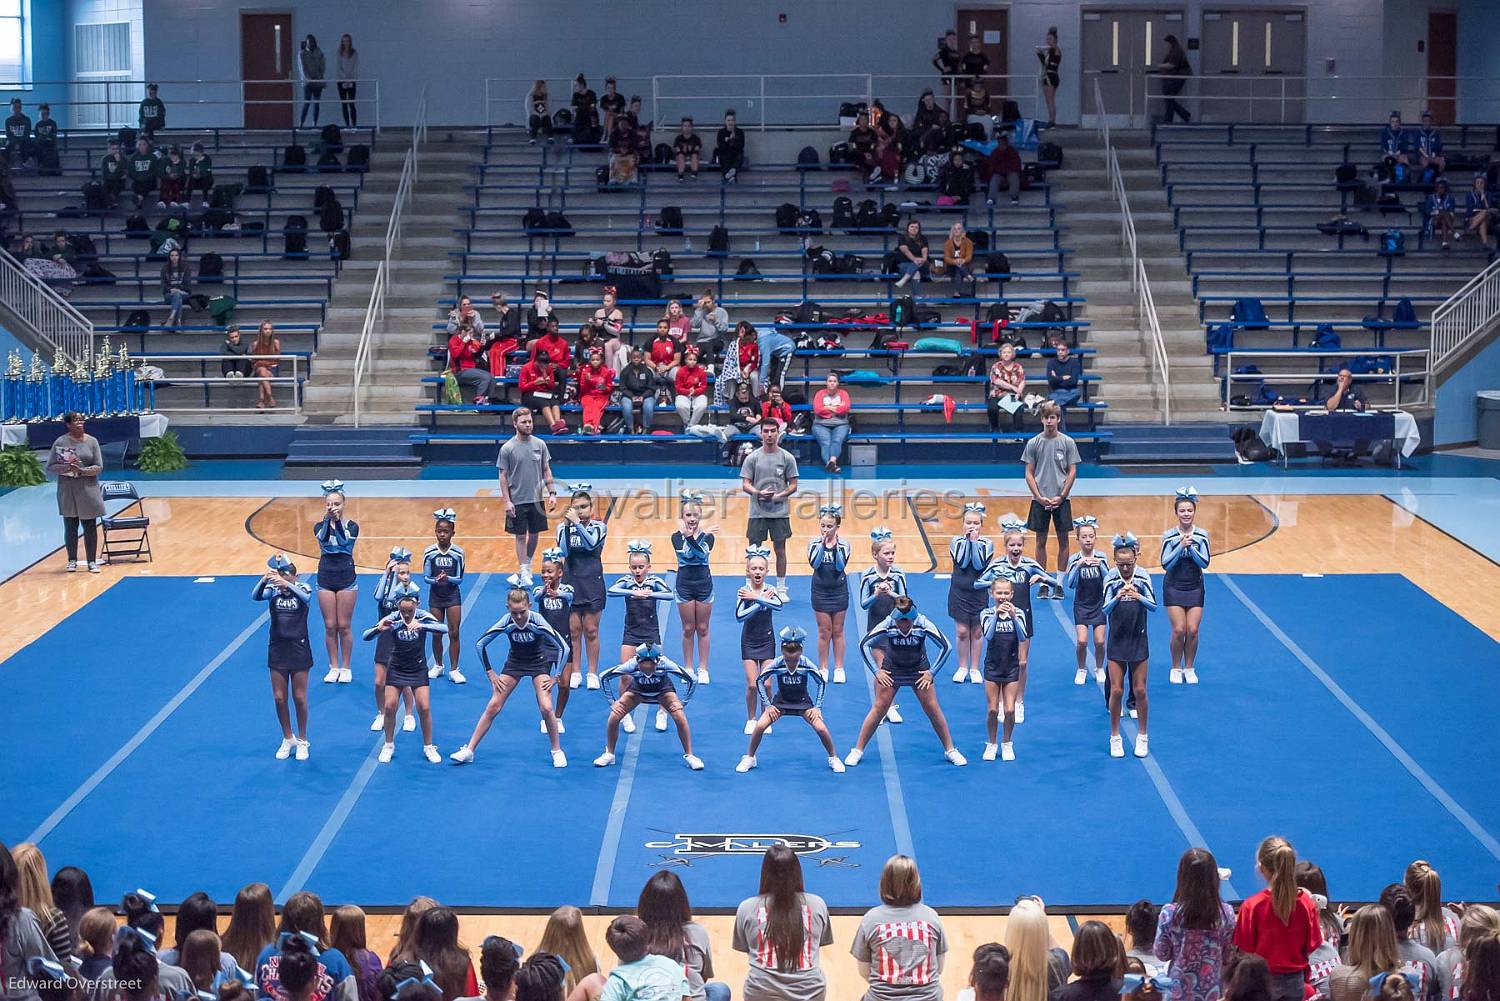 D6YouthCheerClassic 48.jpg